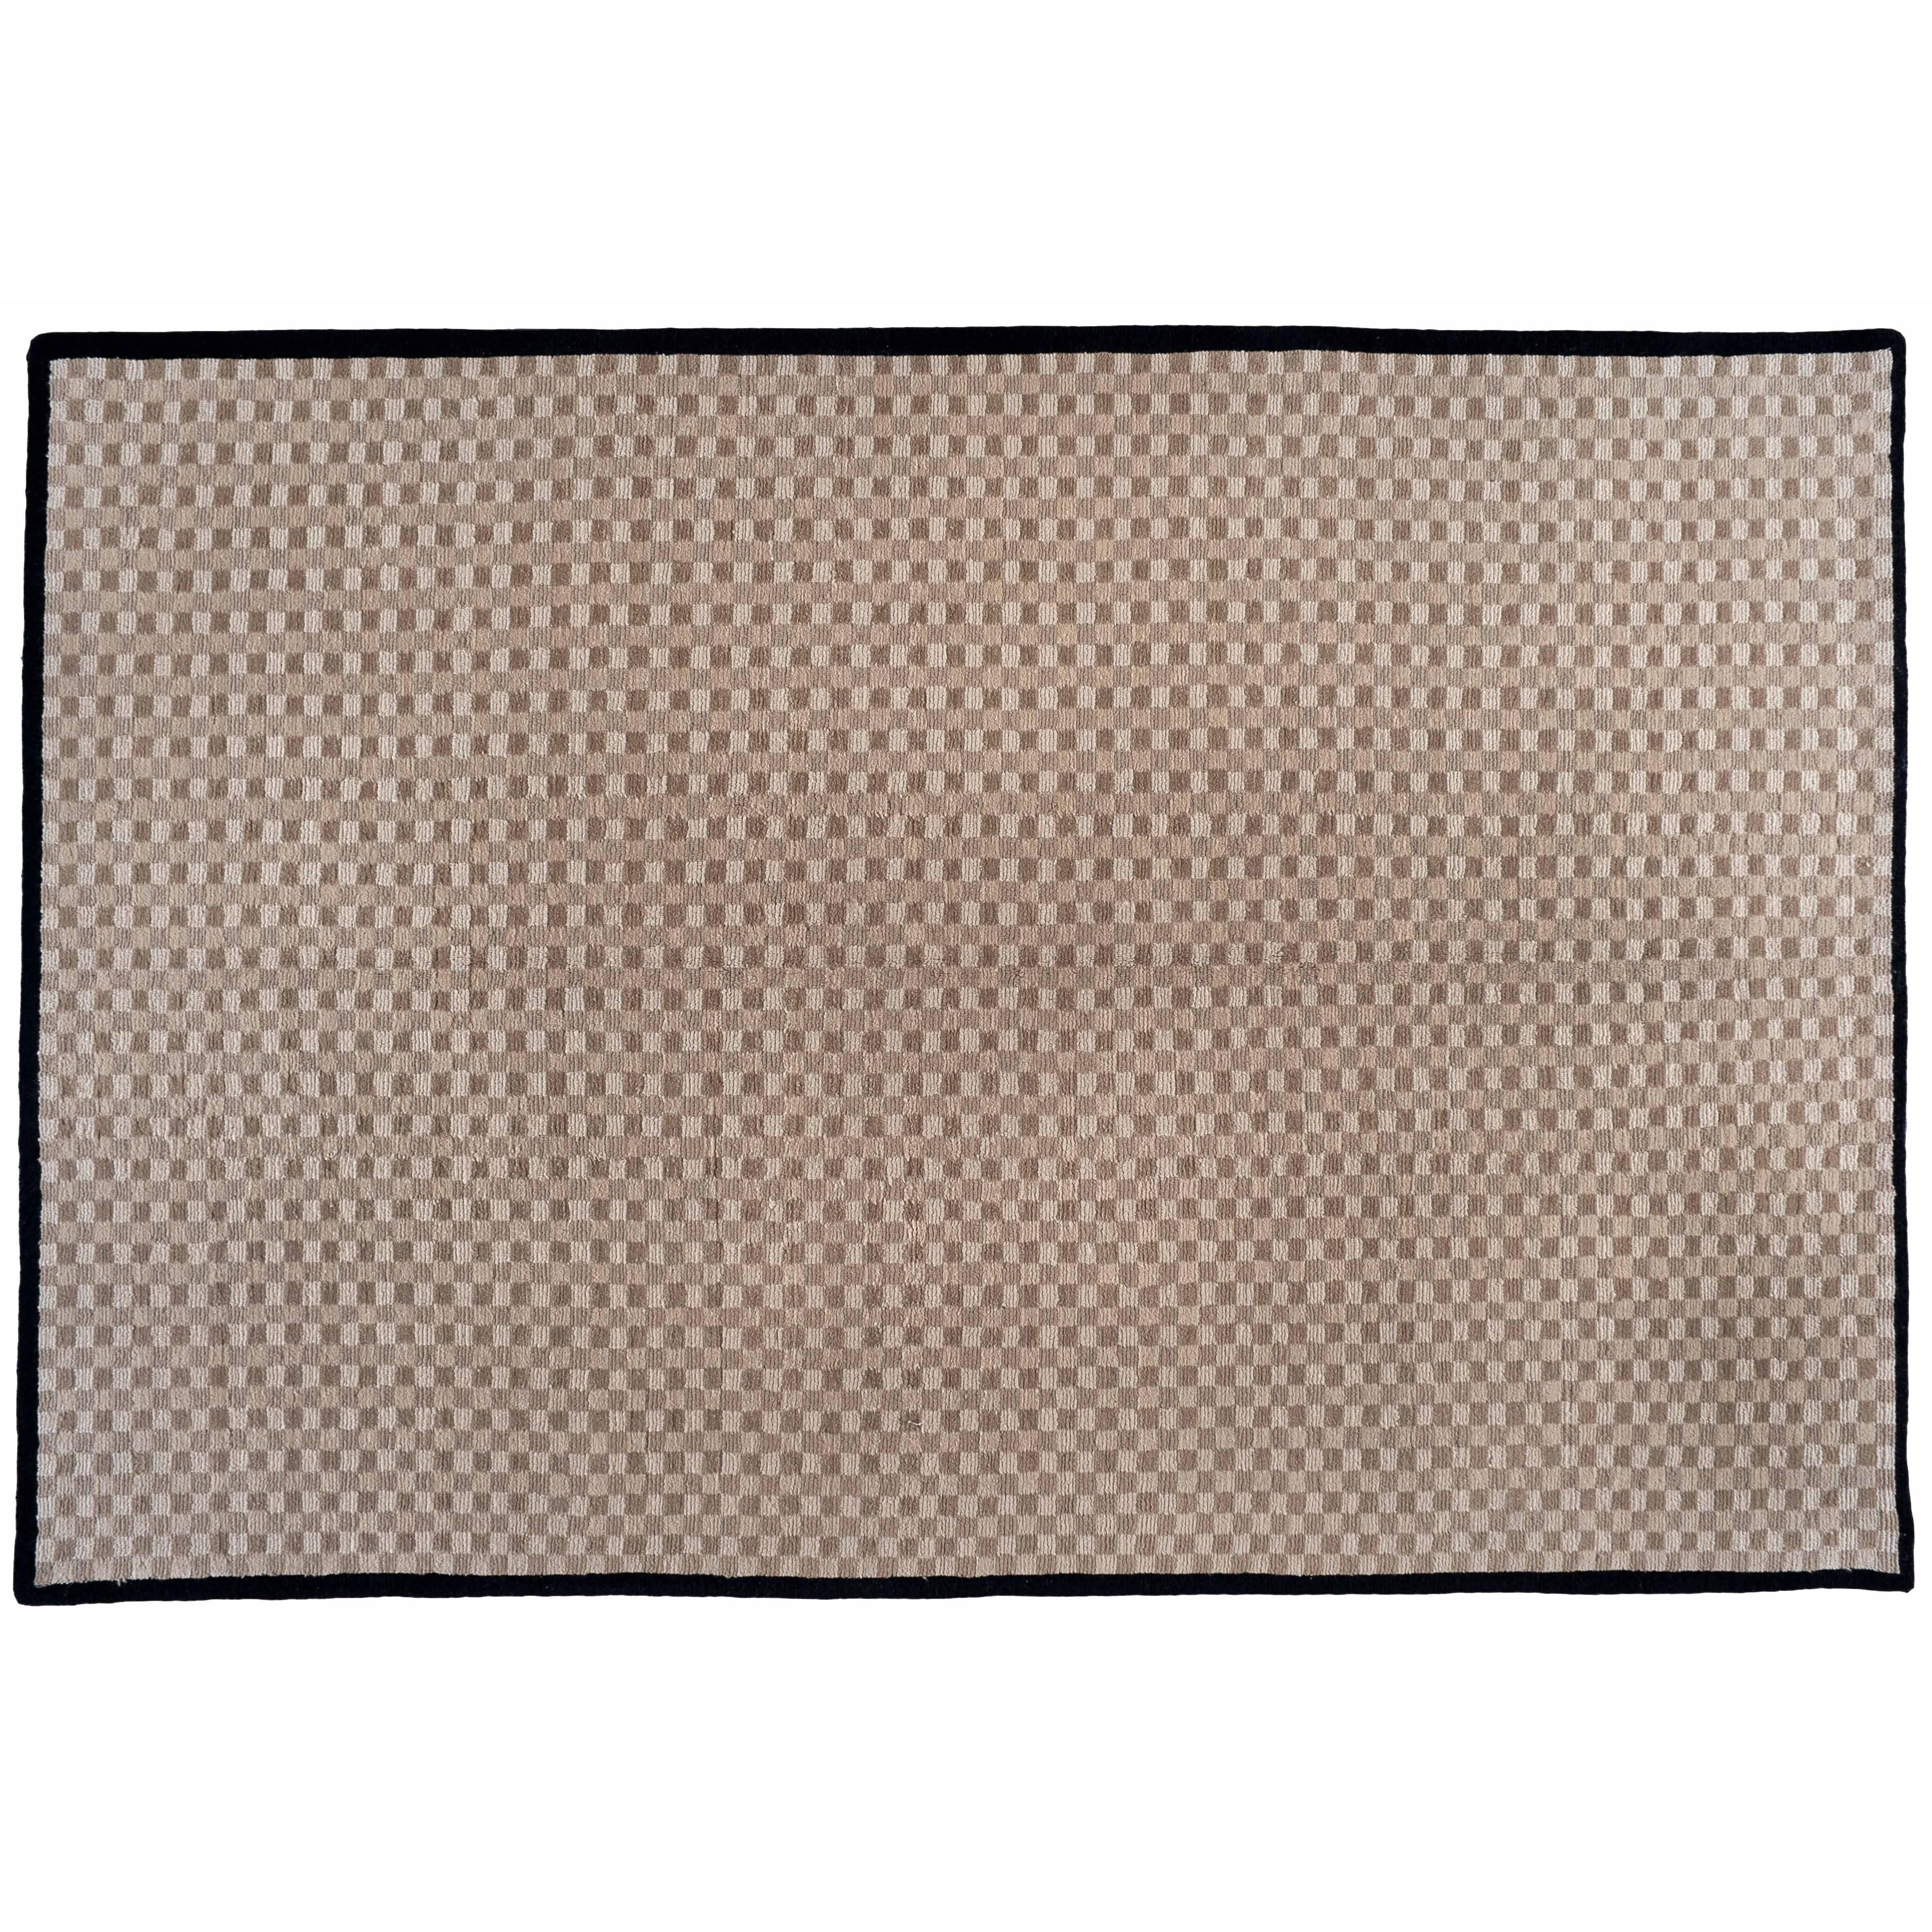 Tone on Tone Checkered Rug with Black Border For Sale